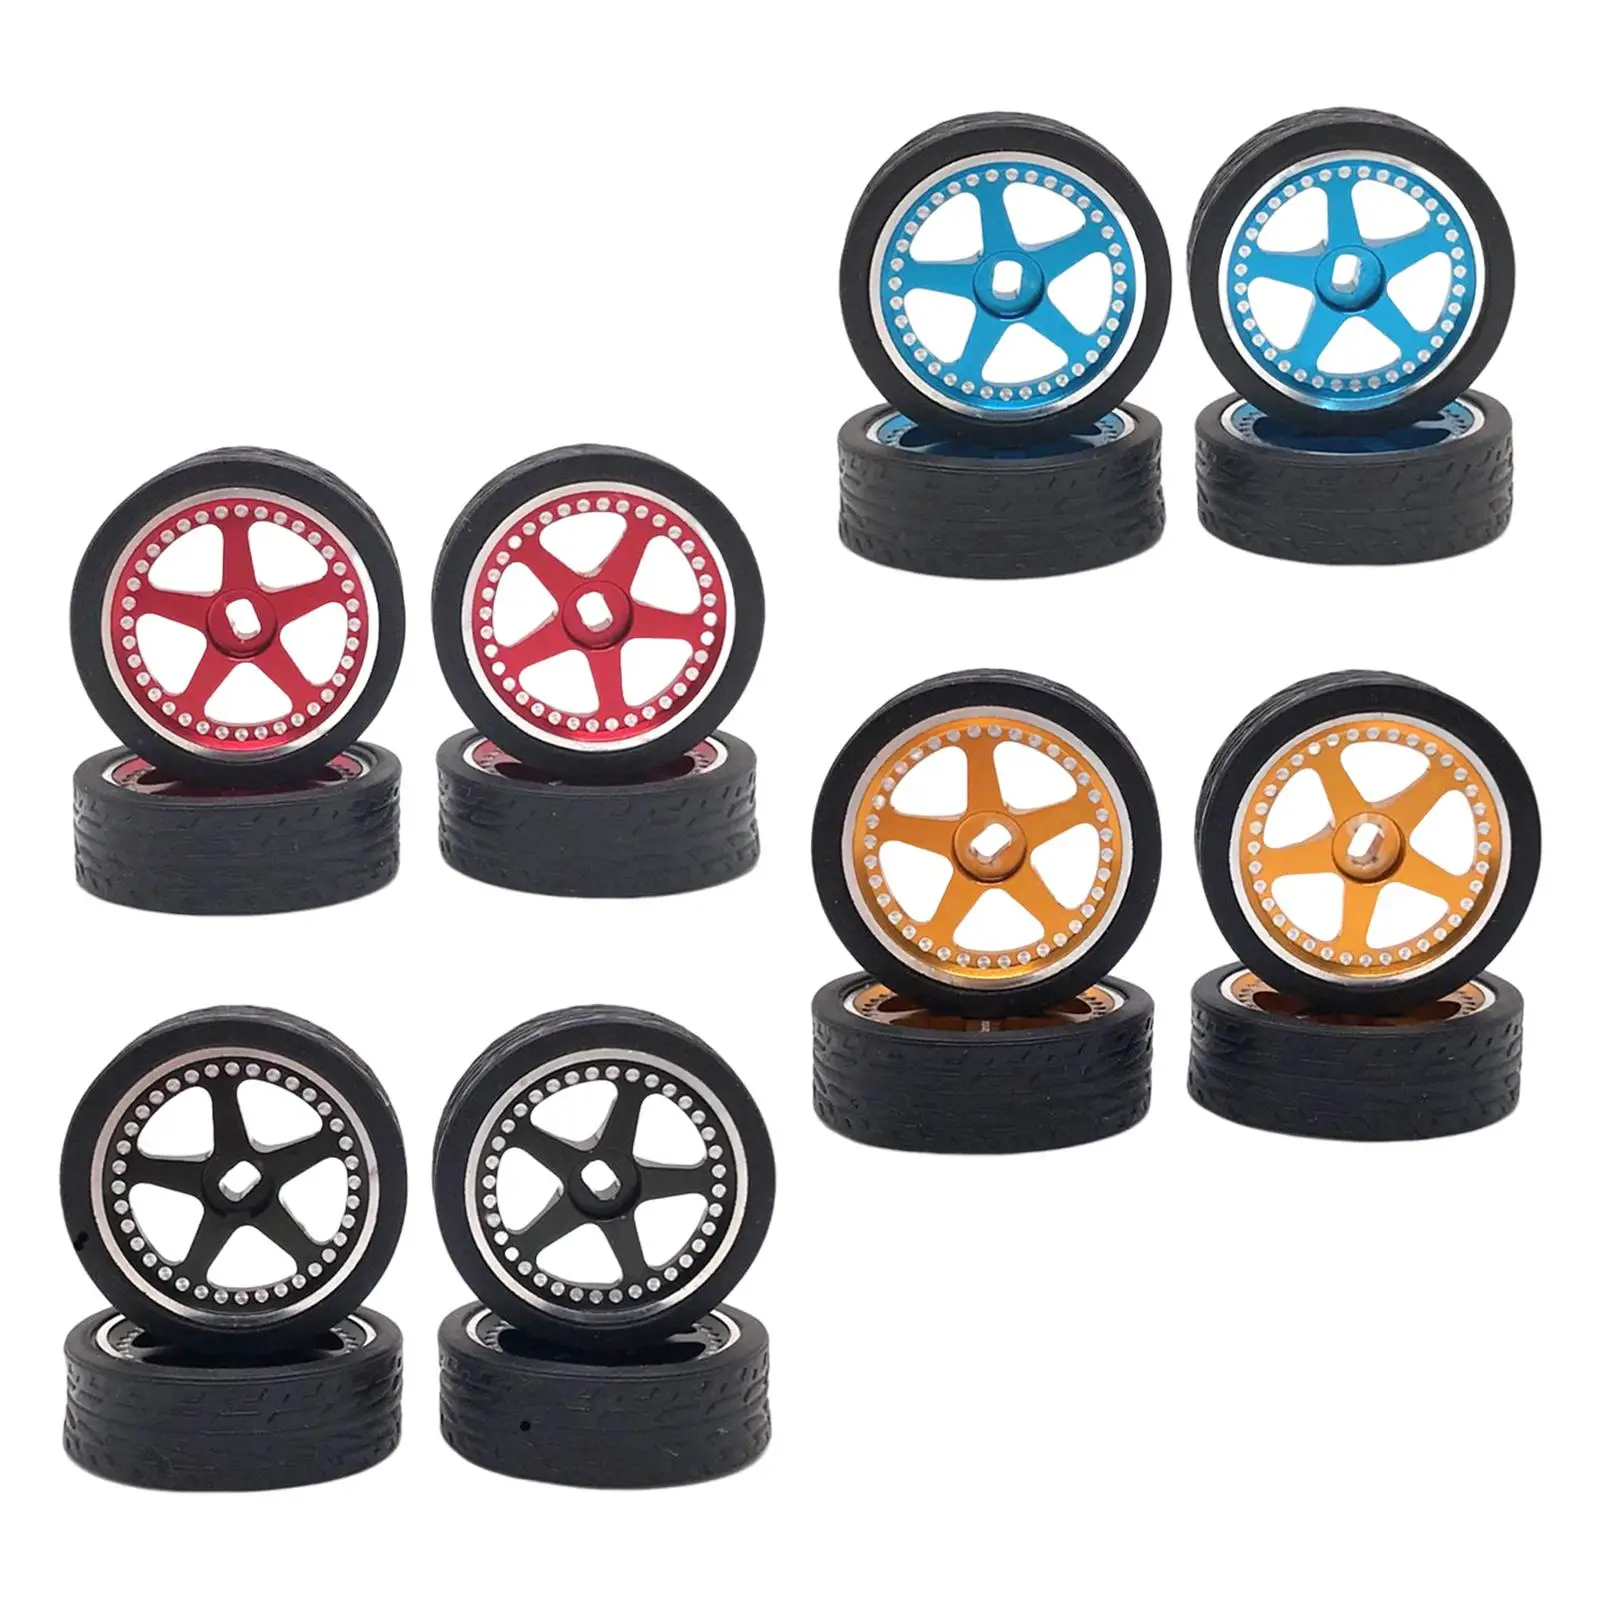 1:28 RC Wheel Hub Plastic RC Car Spare Parts Replacement Universal Metal 4Pcs for Wltoys DIY Accs RC Hobby Car Parts Model Buggy